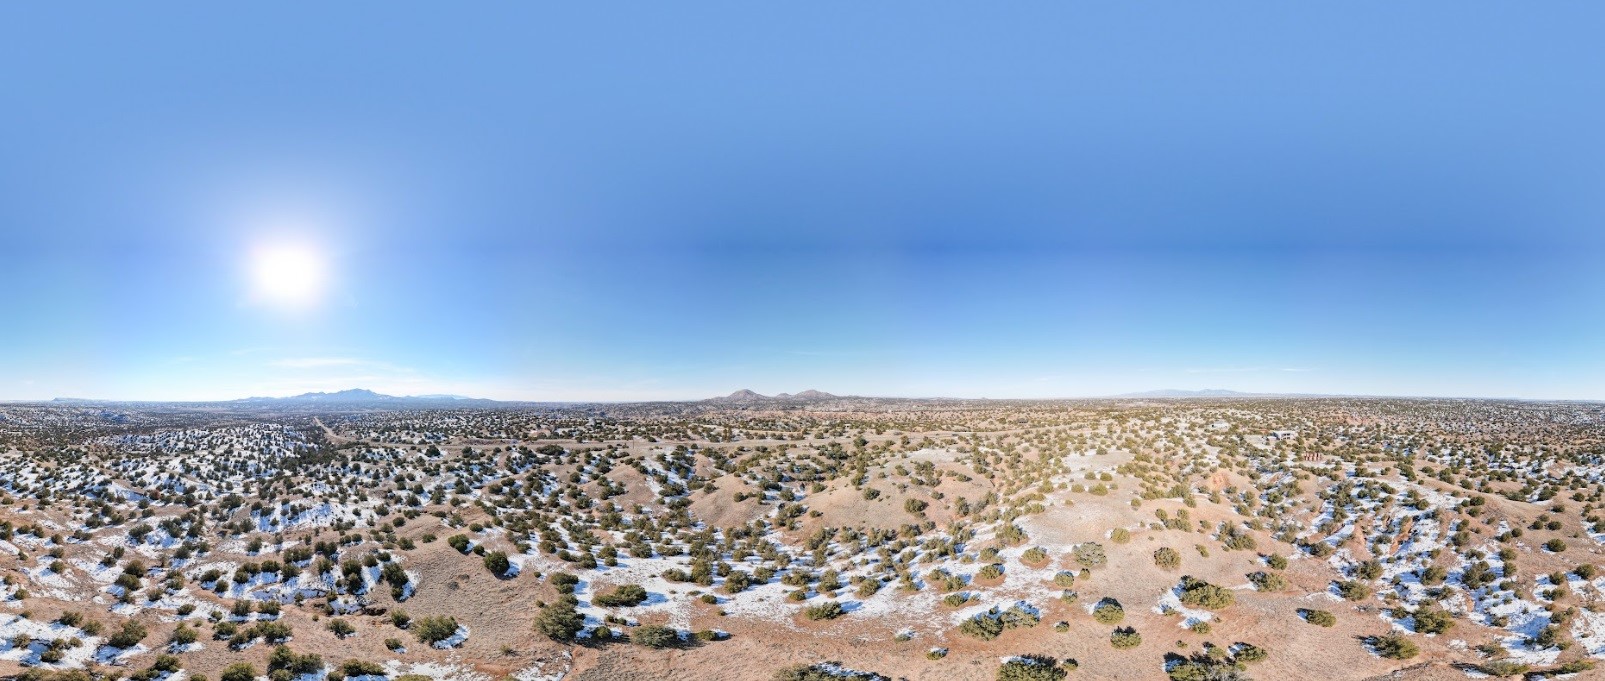 0 Nm 14, Santa Fe, New Mexico 87508, ,Land,For Sale,0 Nm 14,202400124